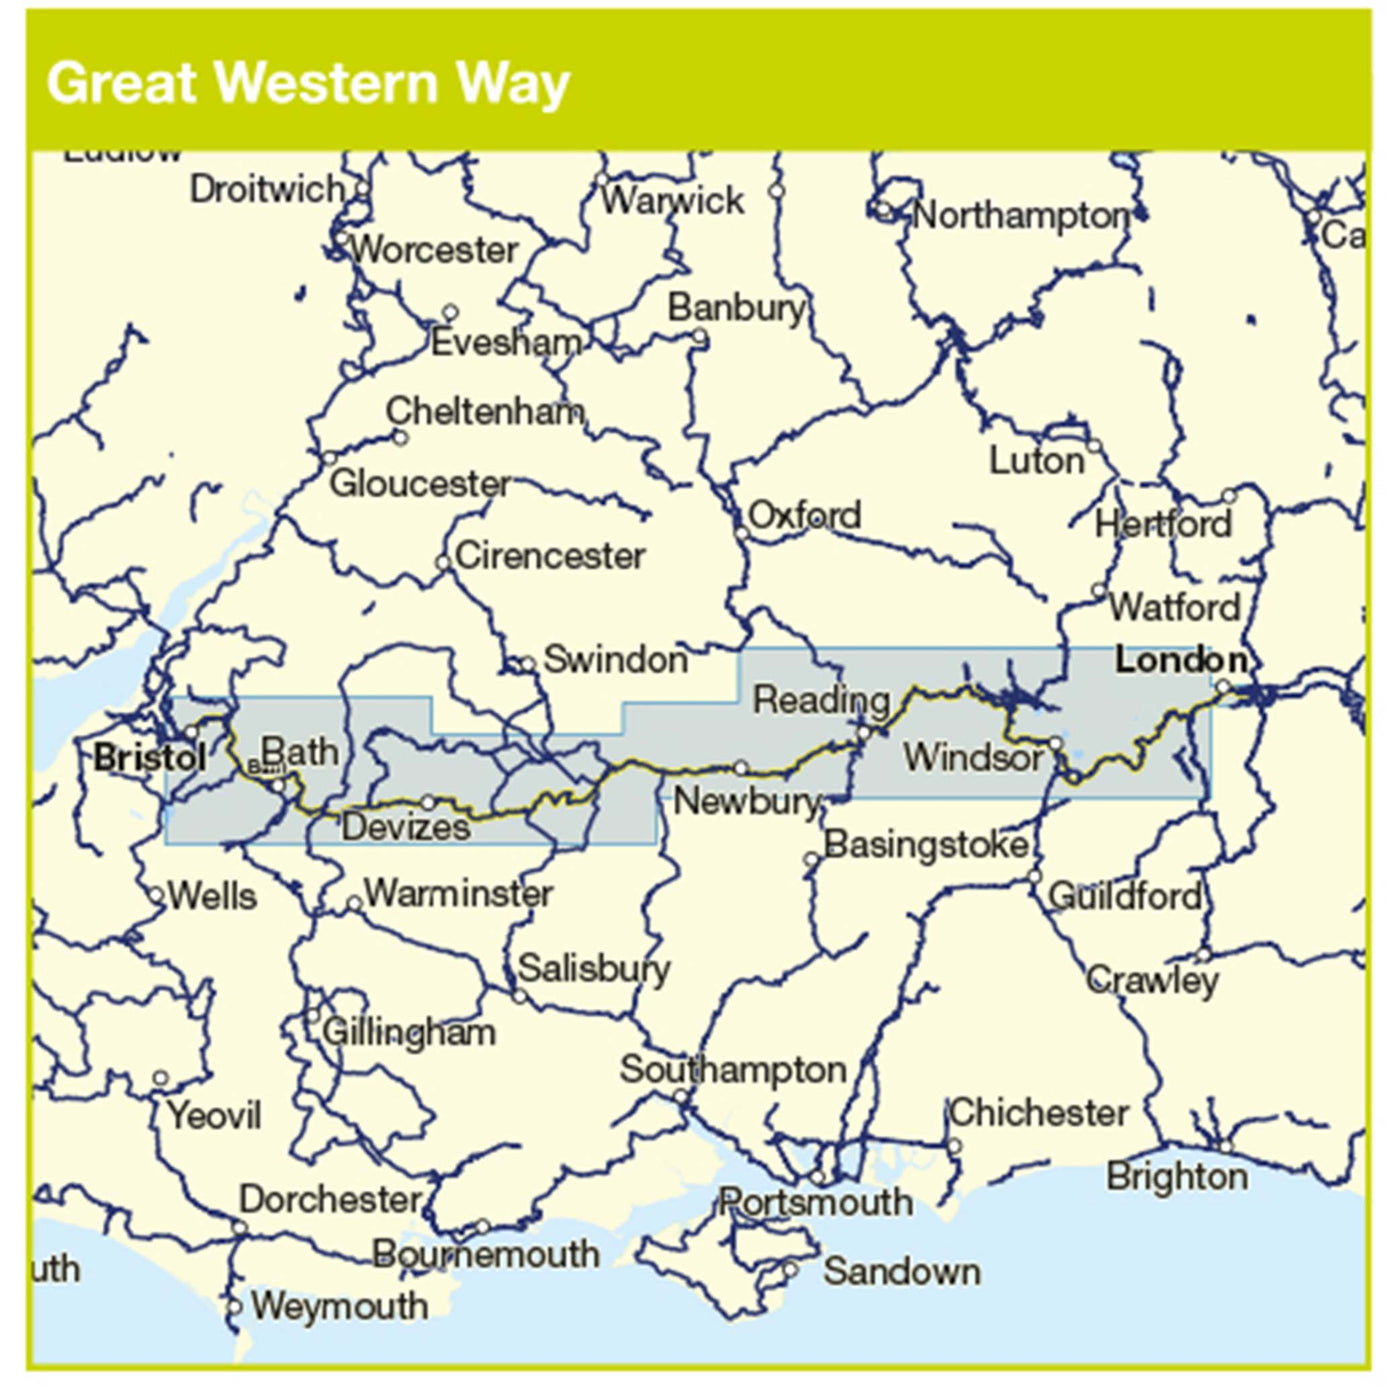 Great Western Way cycle route coverage 